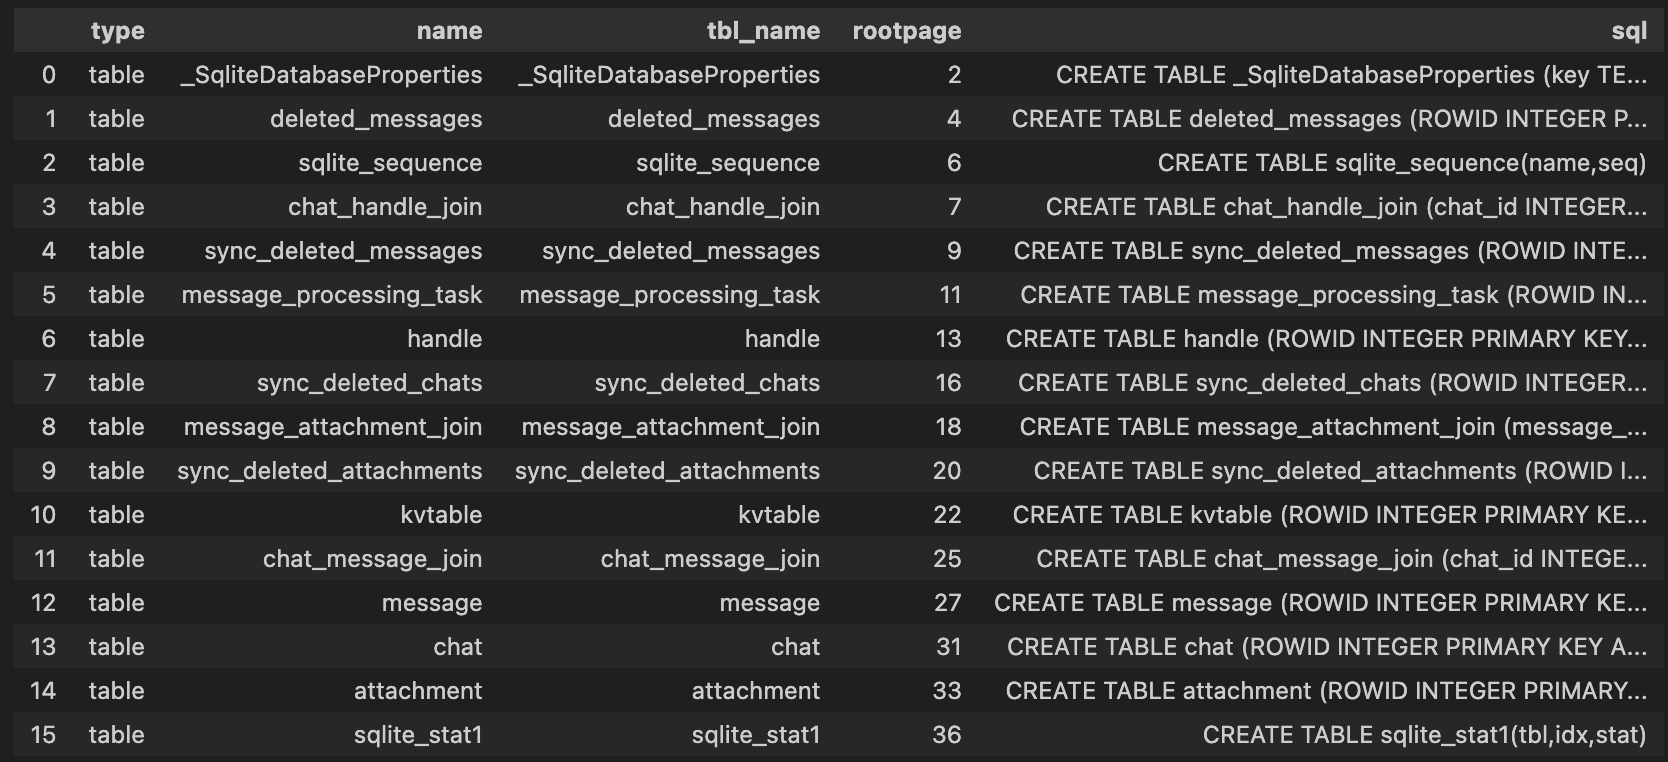 Screenshot of SQL query output for all tables